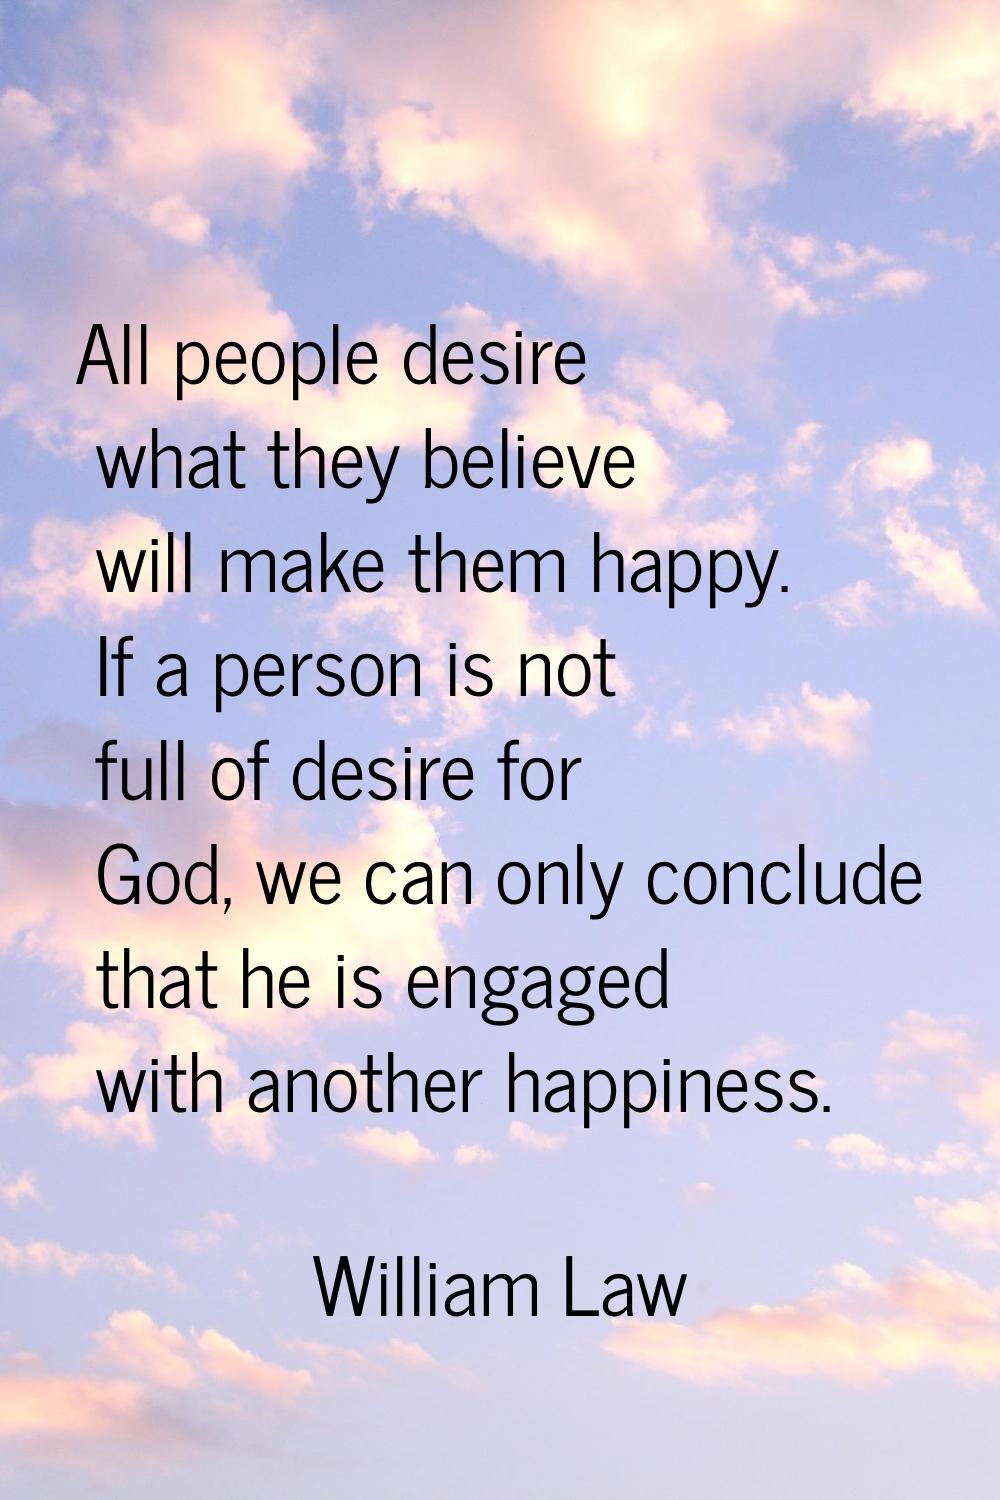 All people desire what they believe will make them happy. If a person is not full of desire for God